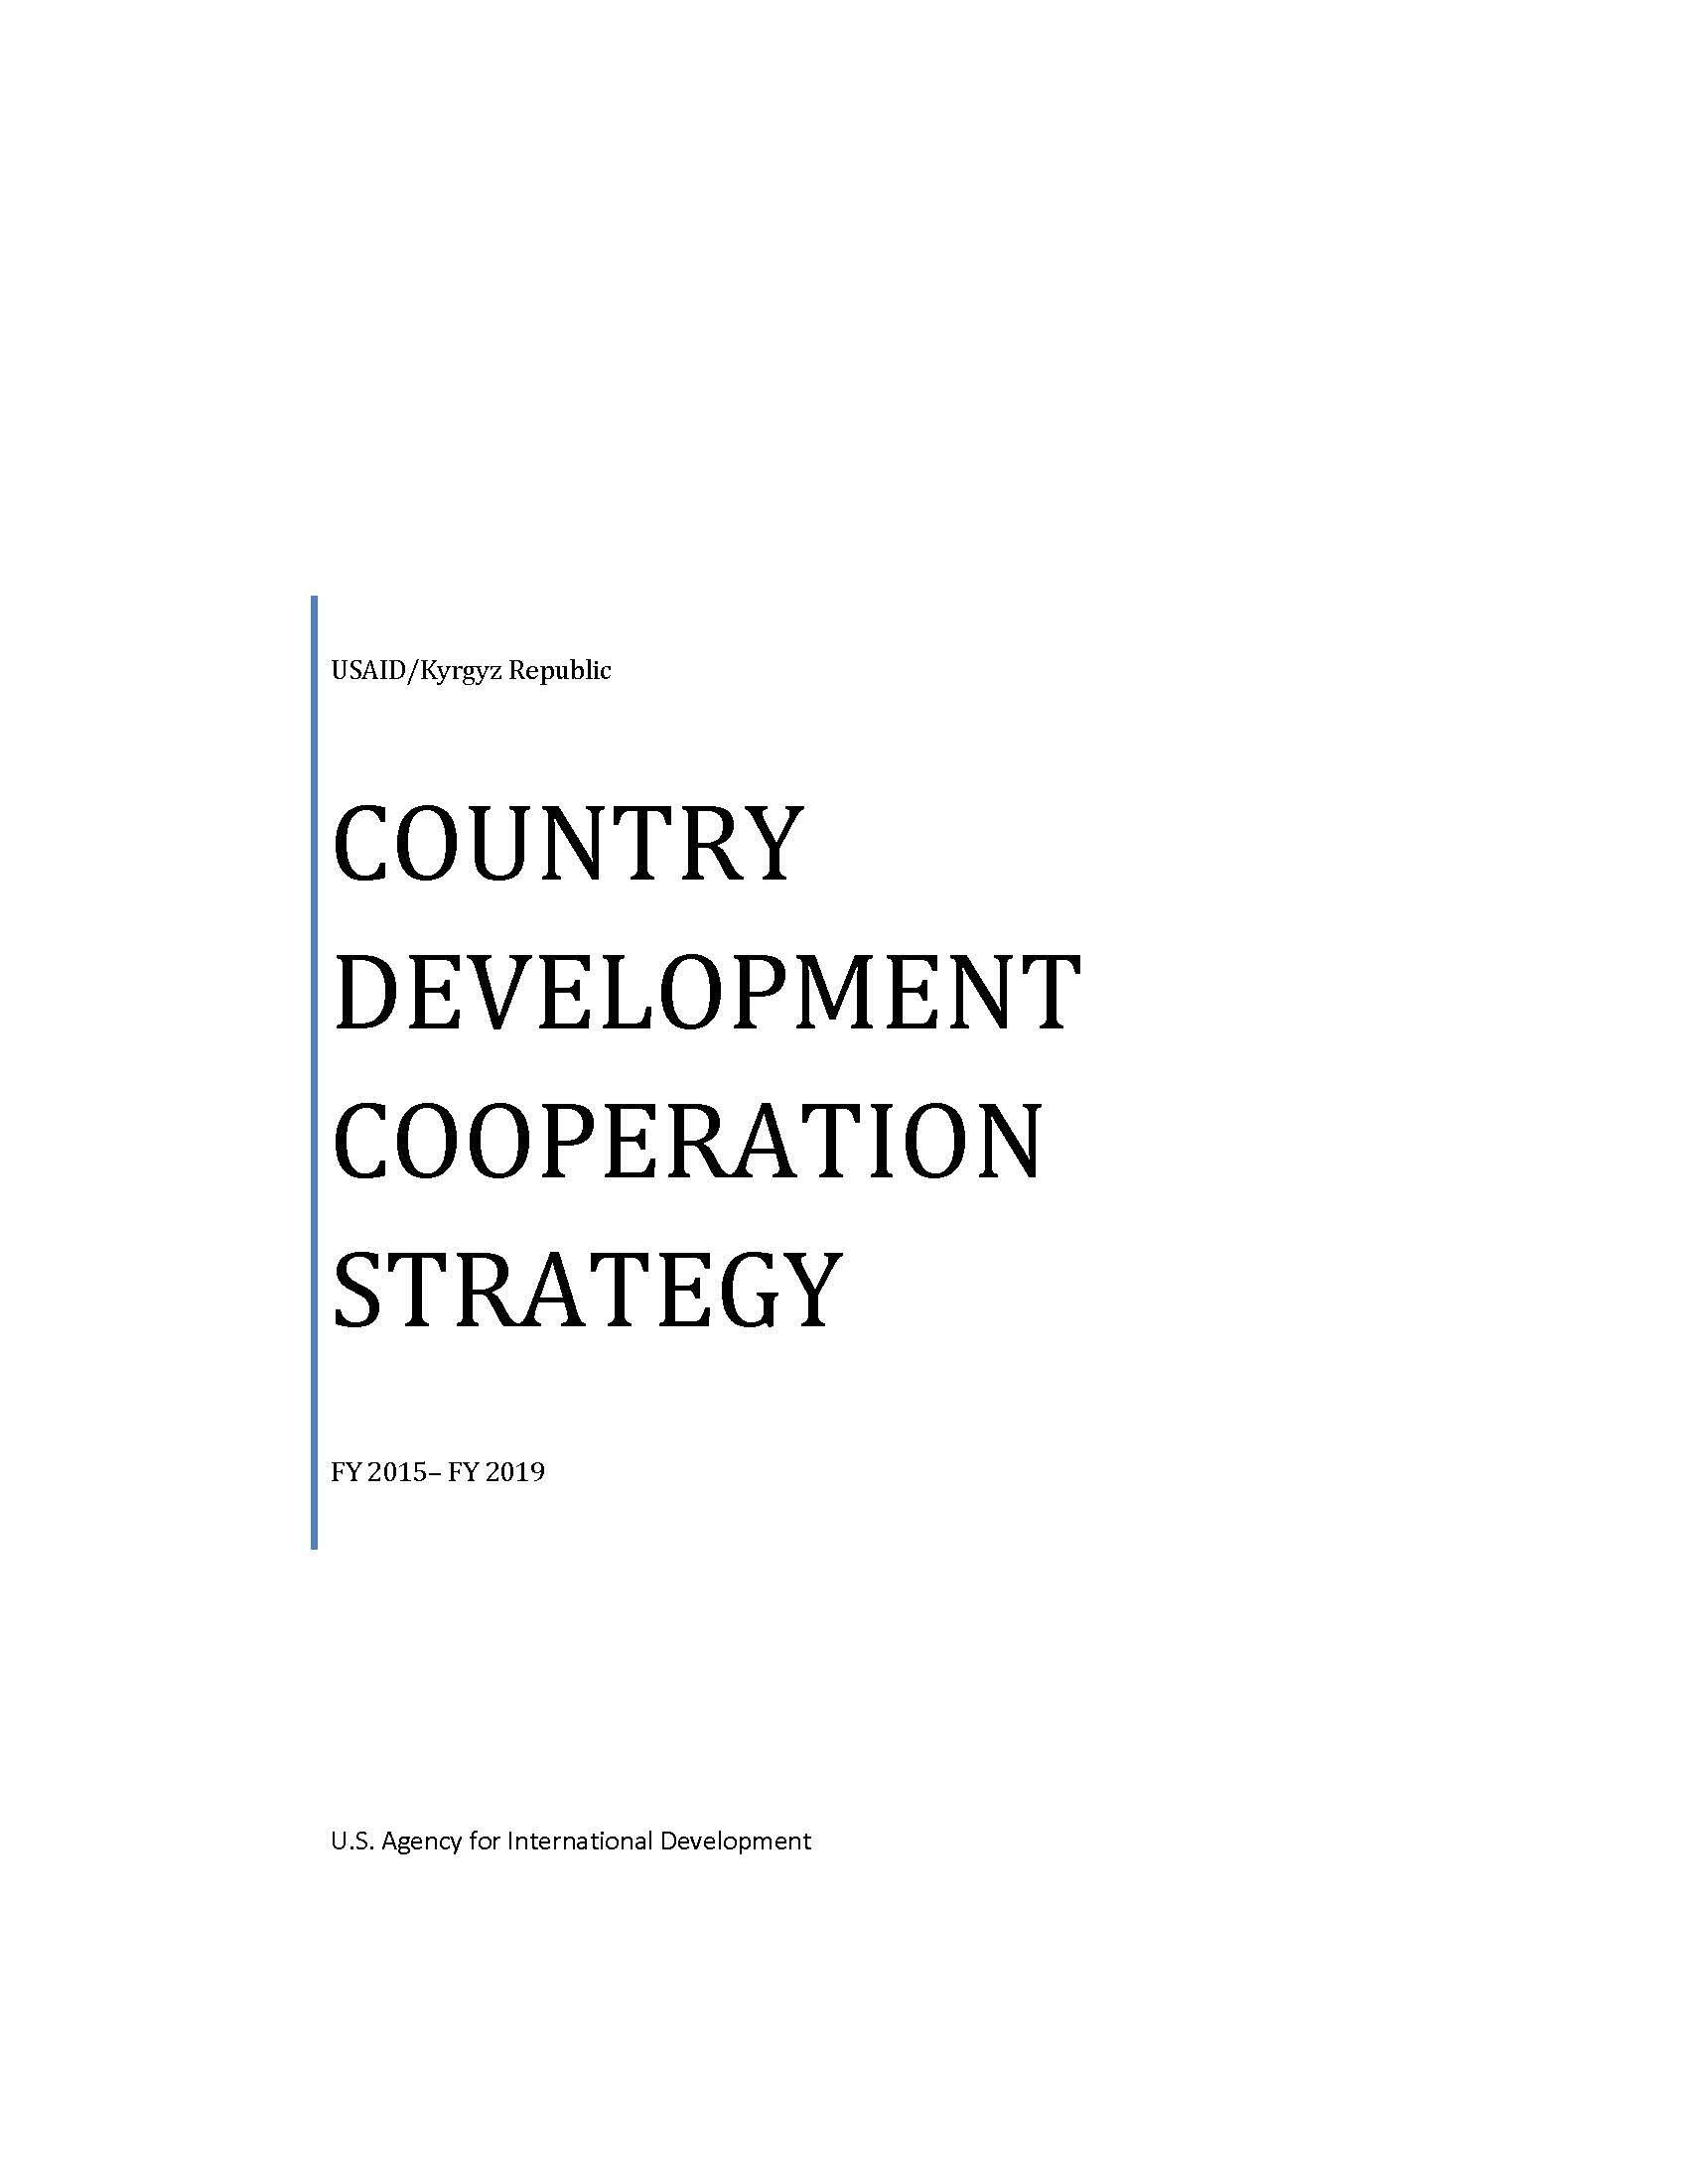 Kyrgyz Republic: Country Development Cooperation Strategy 2015-2019